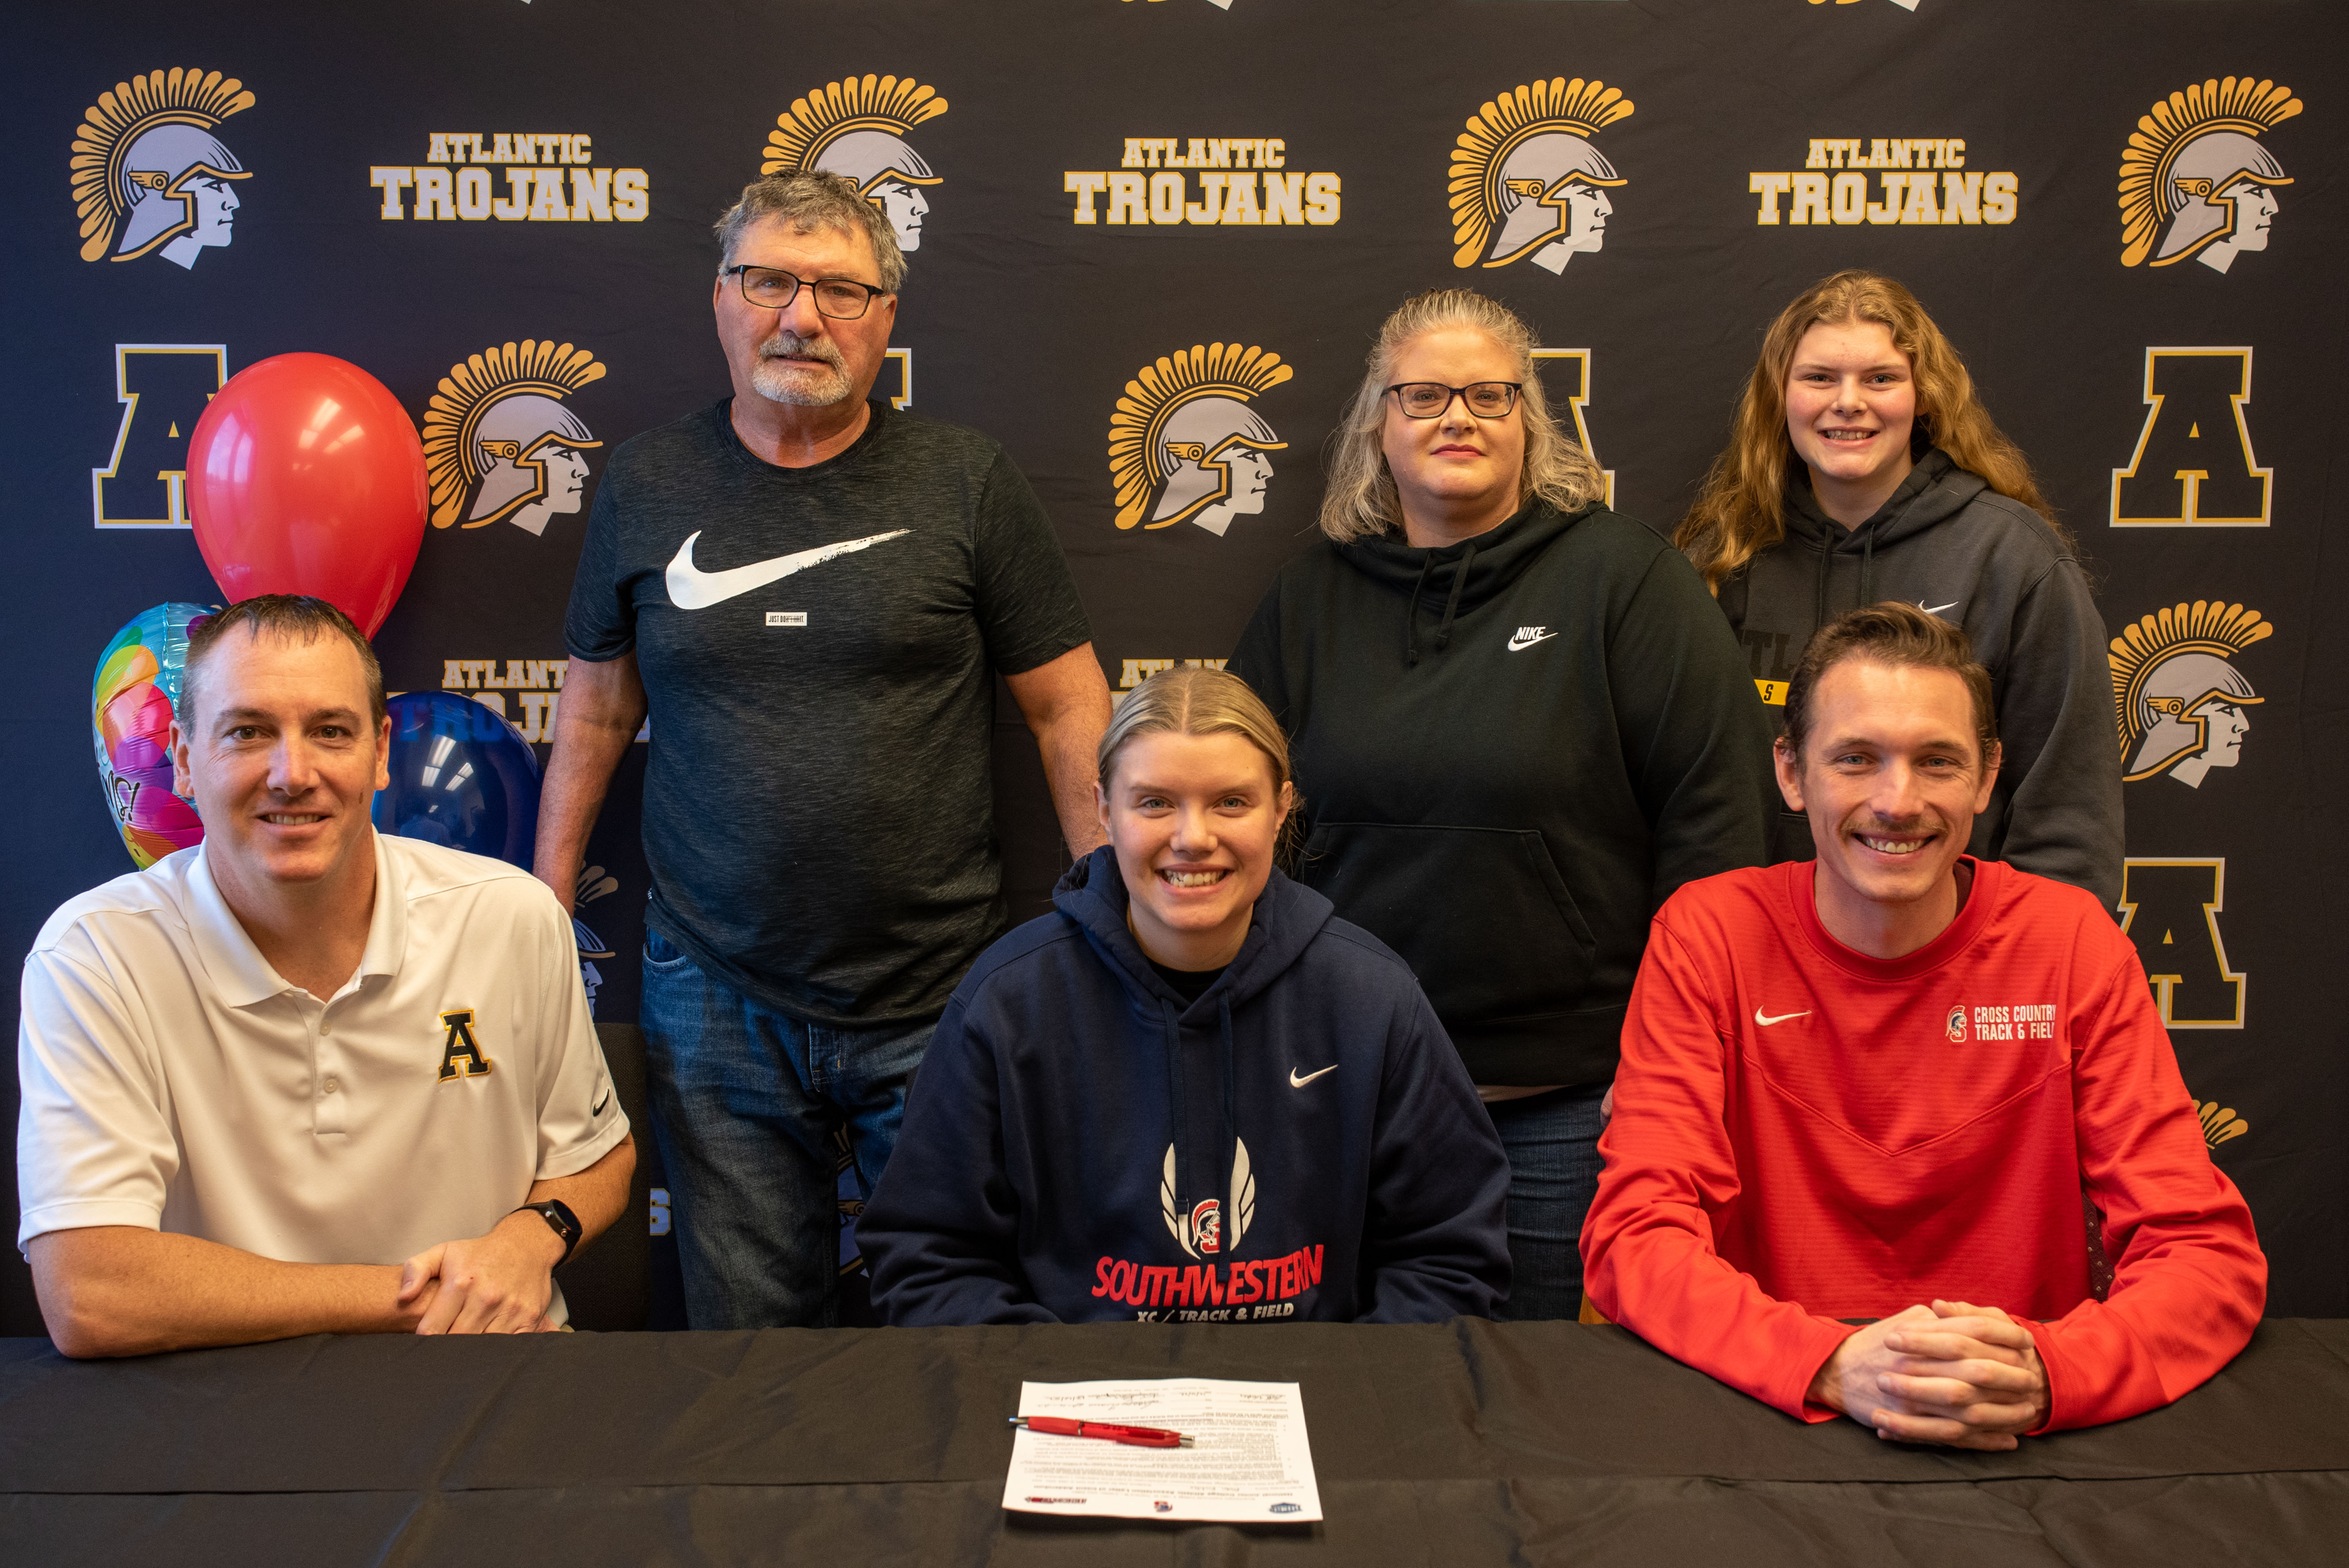 Abbi Richter signs her LOI to join the Southwestern track & field program in the 2023-24 season. Pictured, in front from left, are Matt Mullenix, Atlantic girls track coach; Abbi Richter; and Scott Vicker, Southwestern director of cross country/track & field. In back, from left, are Richter's parents, Brian and Jennifer Richter; and sister Maddie Richter.